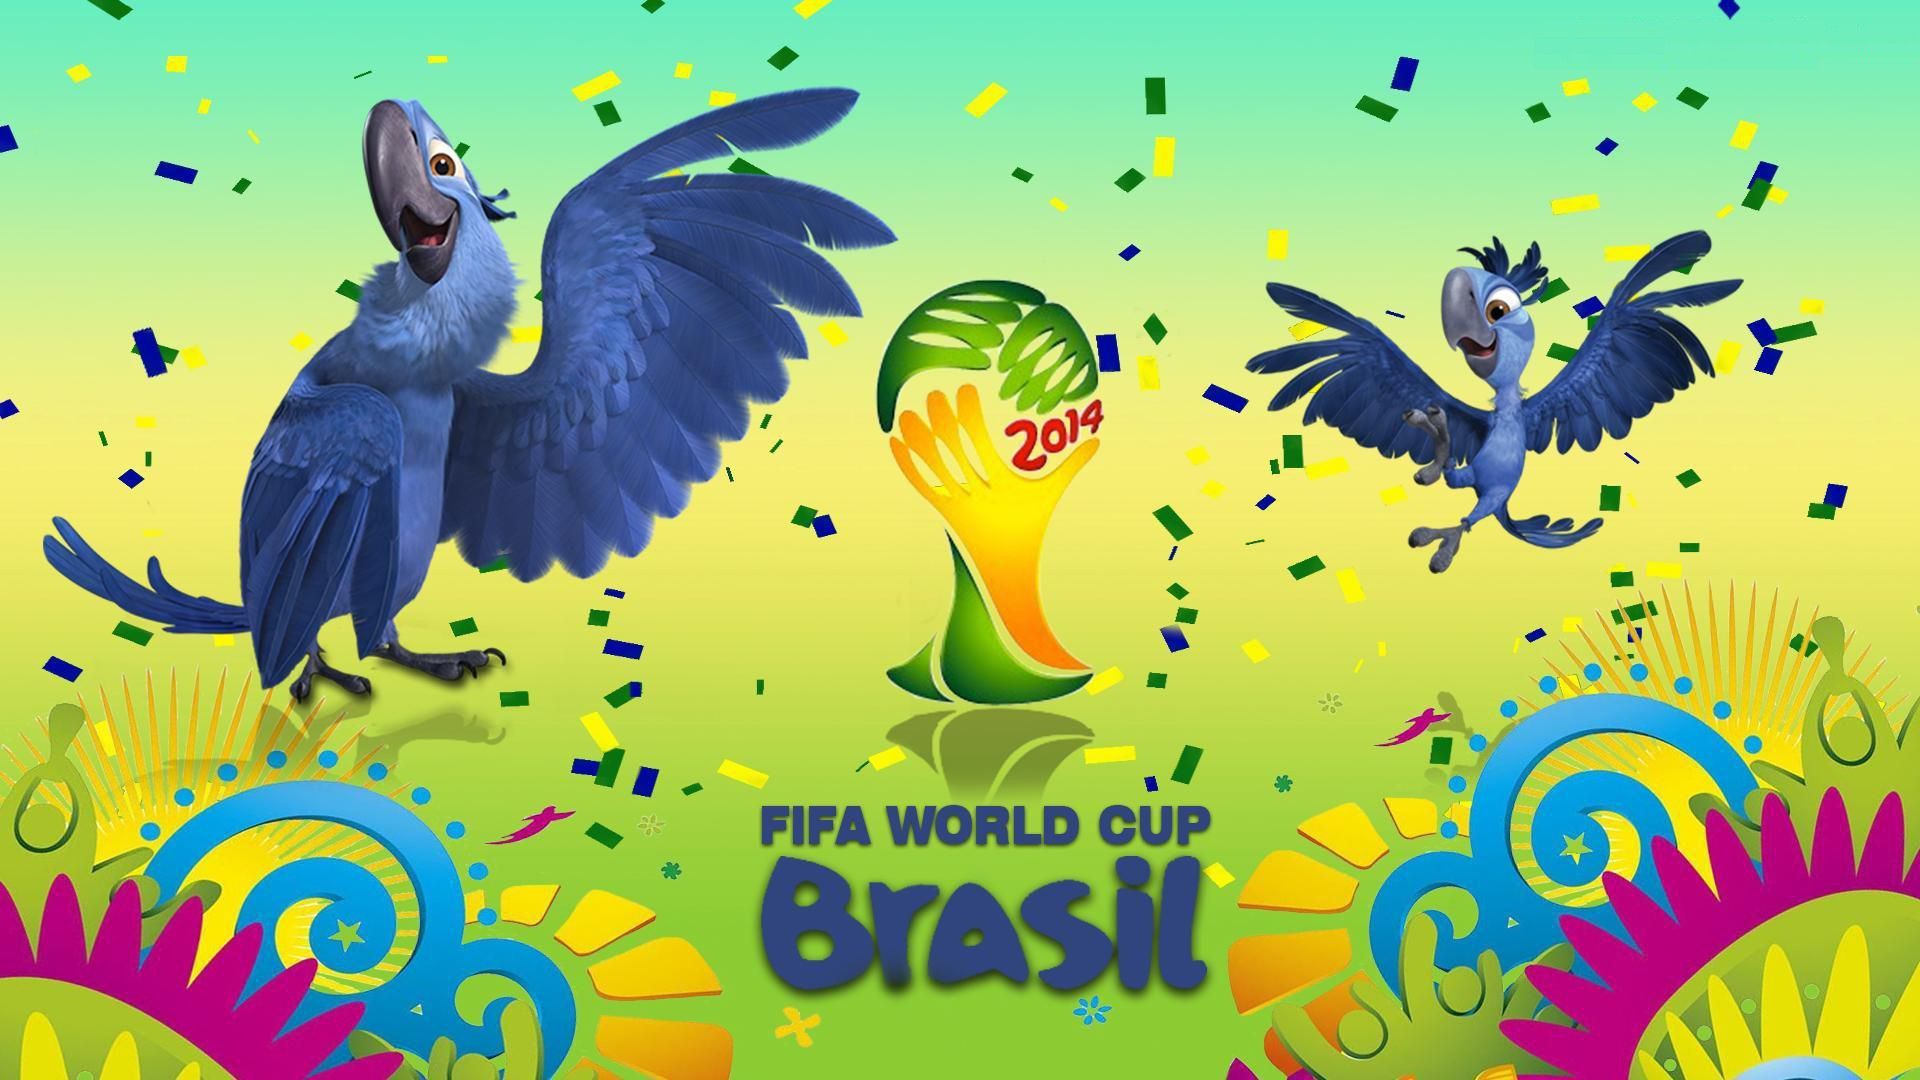 Brazil World Cup 2014 phone, desktop wallpaper, picture, photo, bckground image